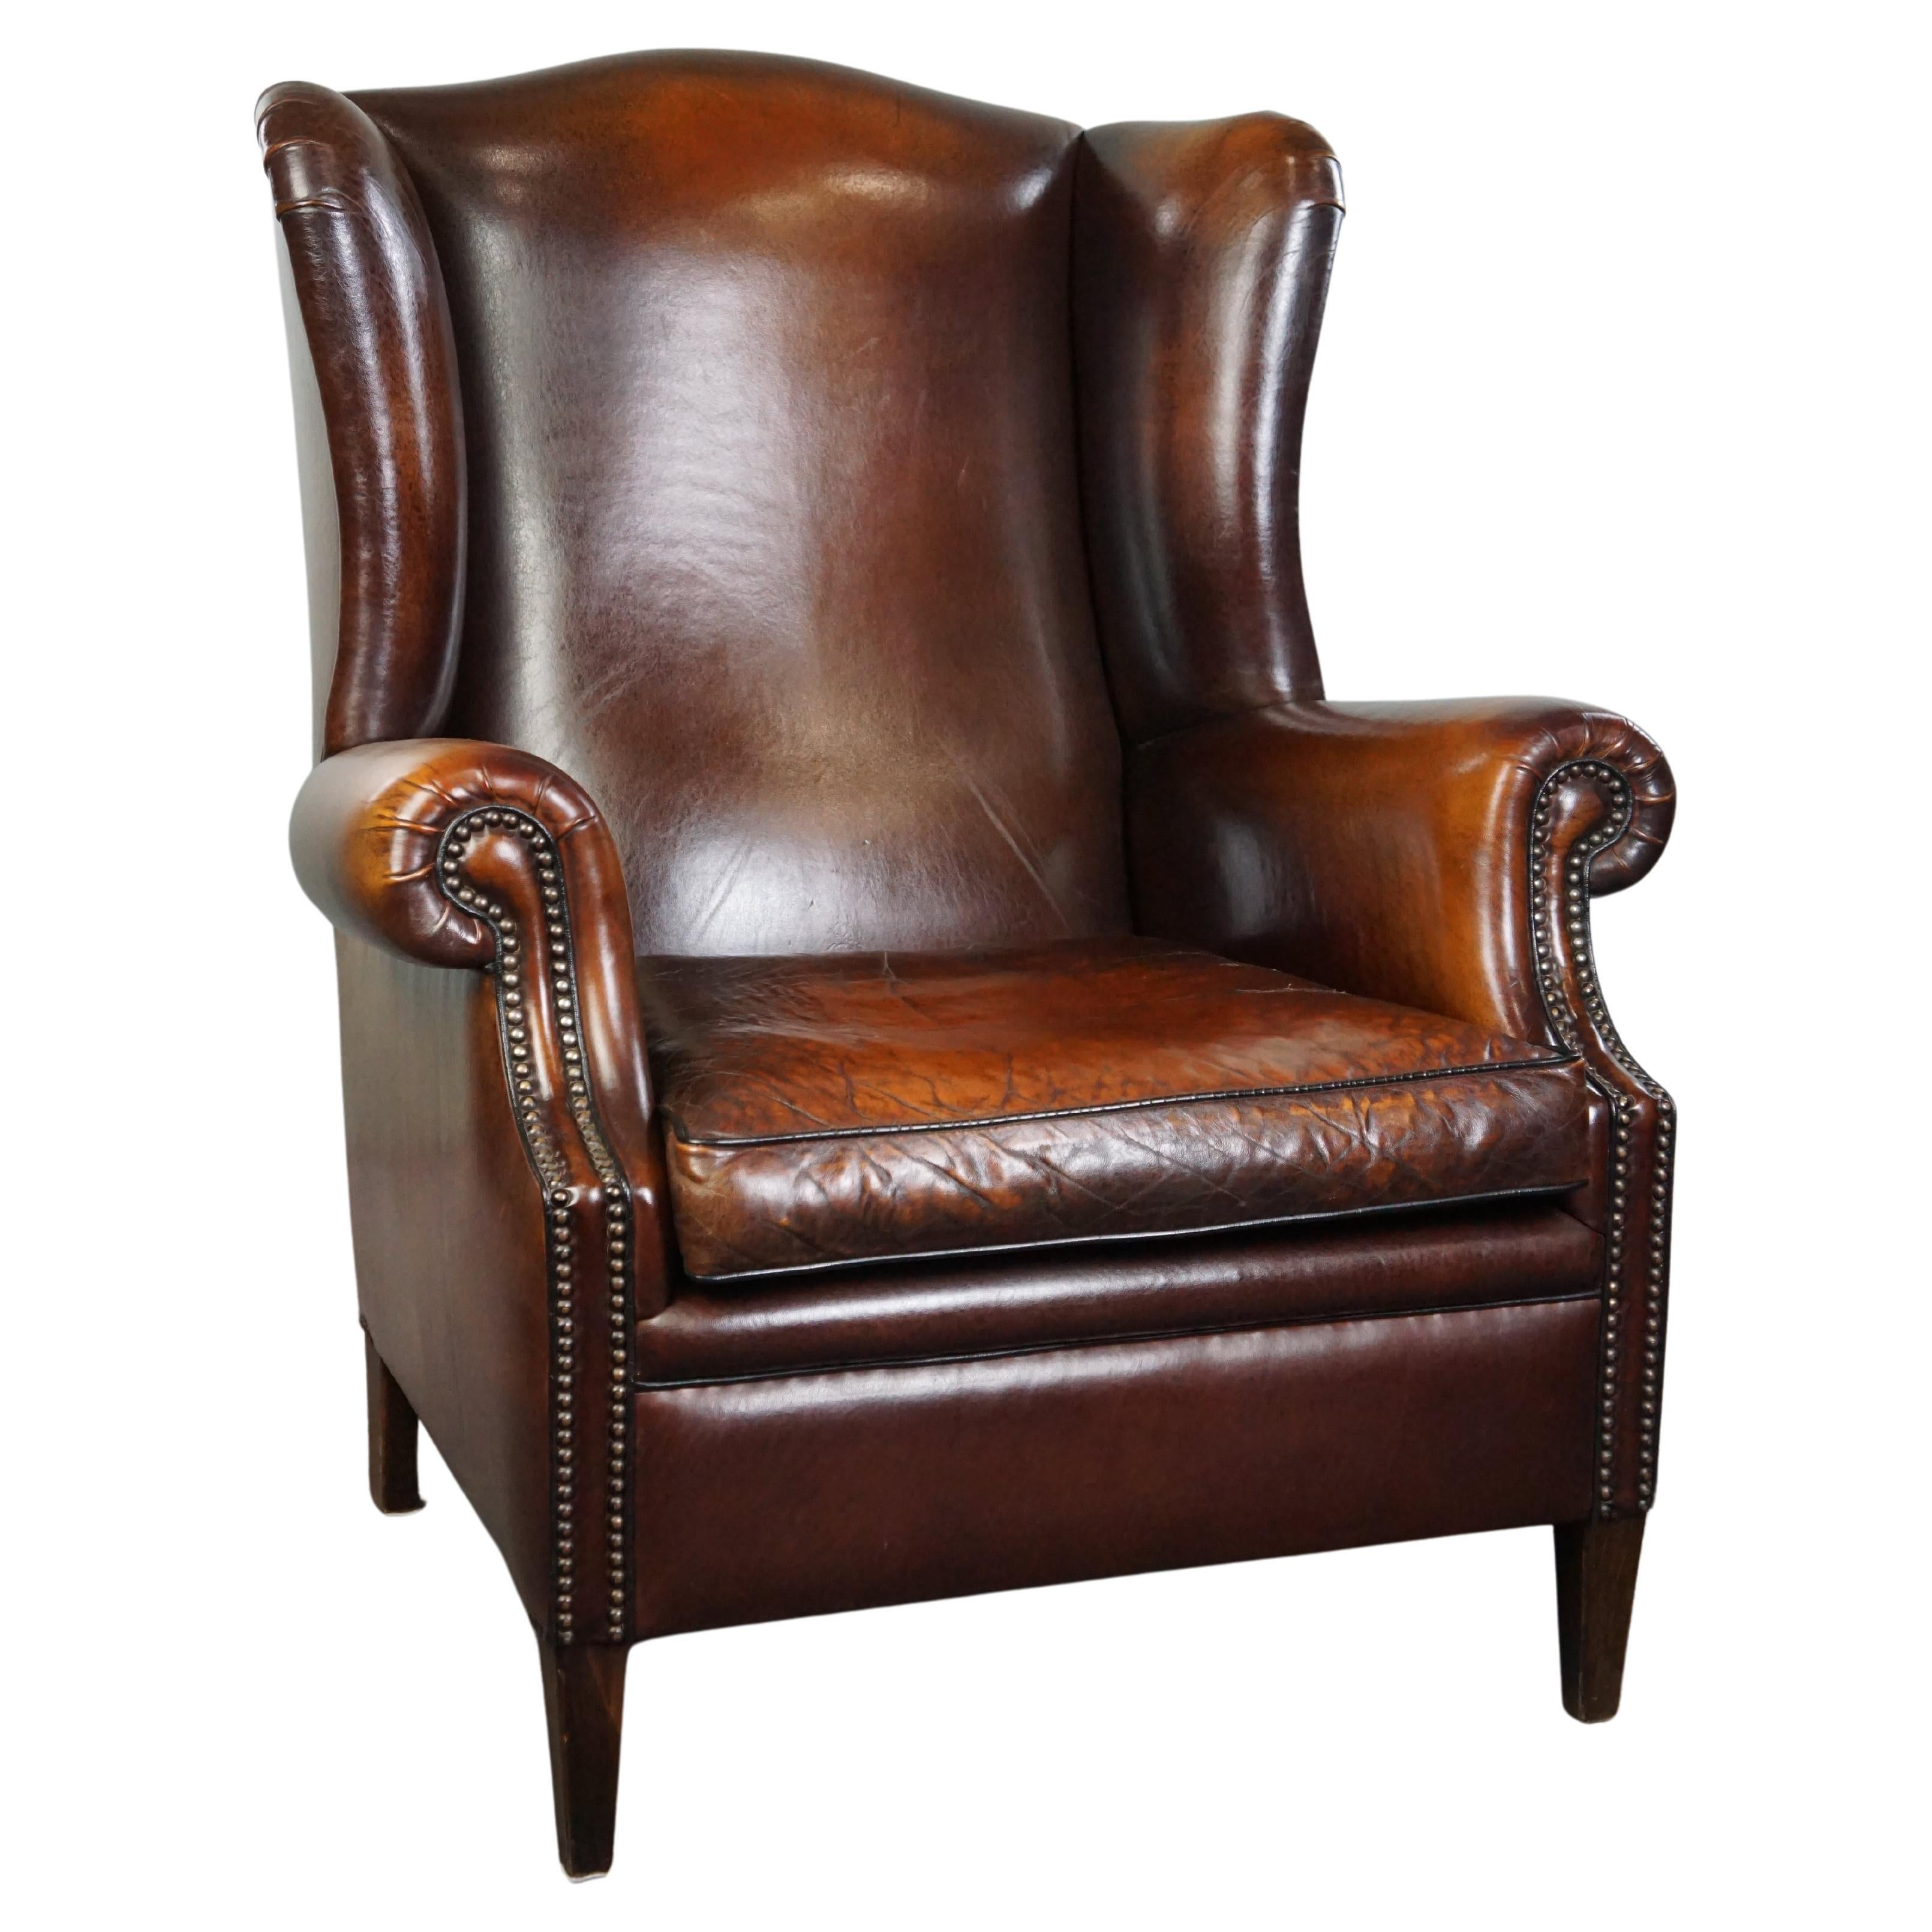 Luxurious large sheep leather wingback armchair with beautiful colors and patina